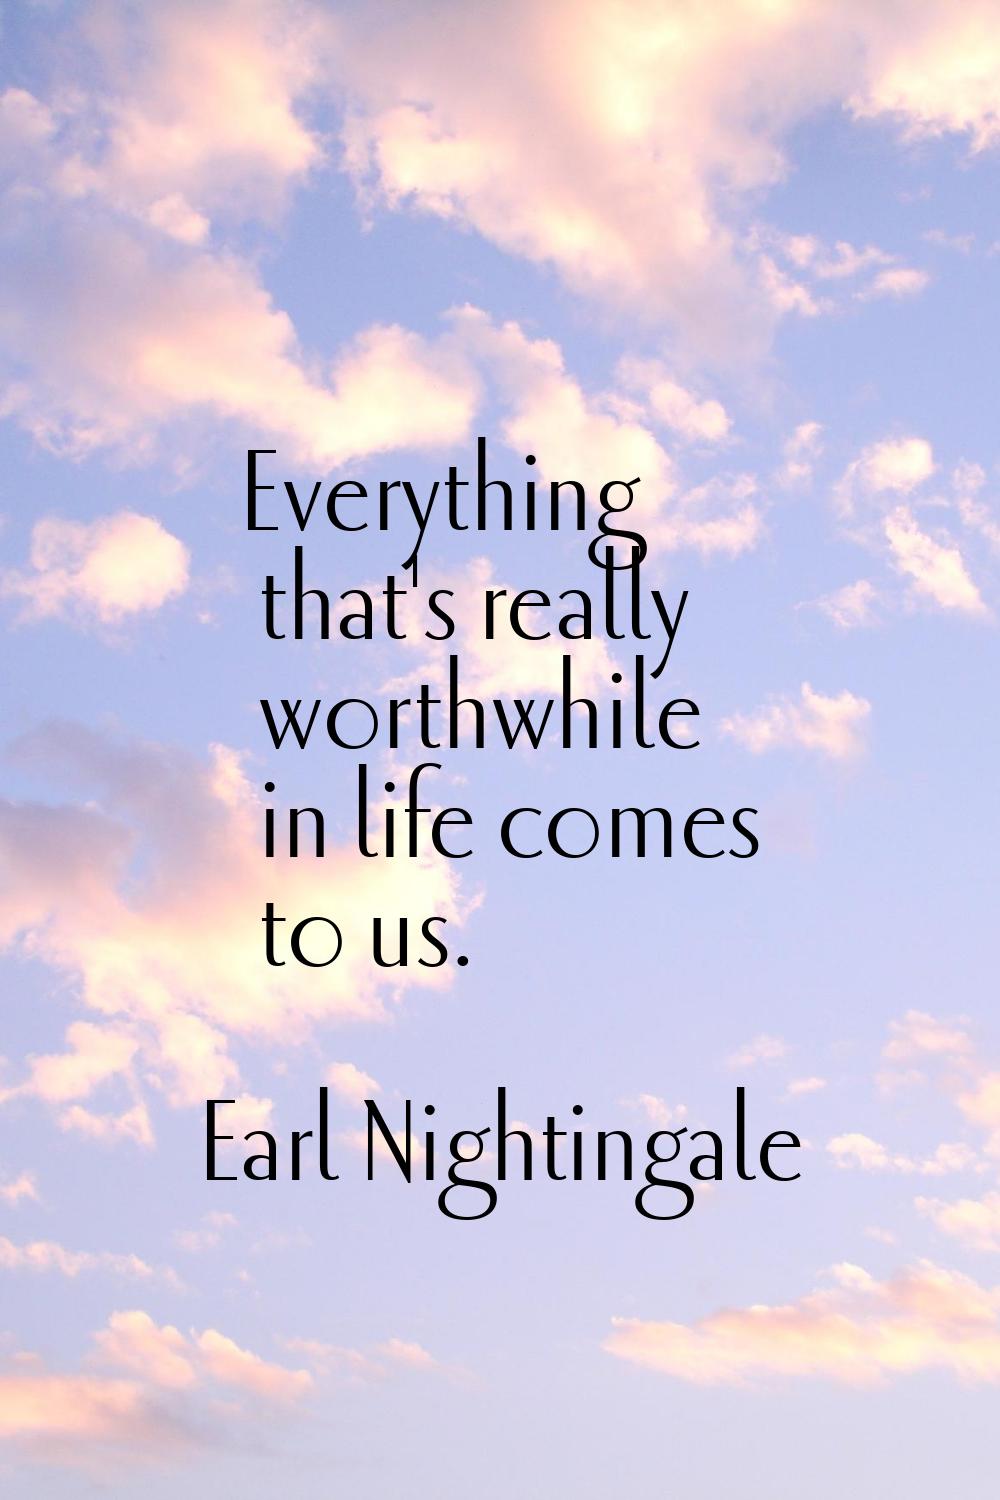 Everything that's really worthwhile in life comes to us.